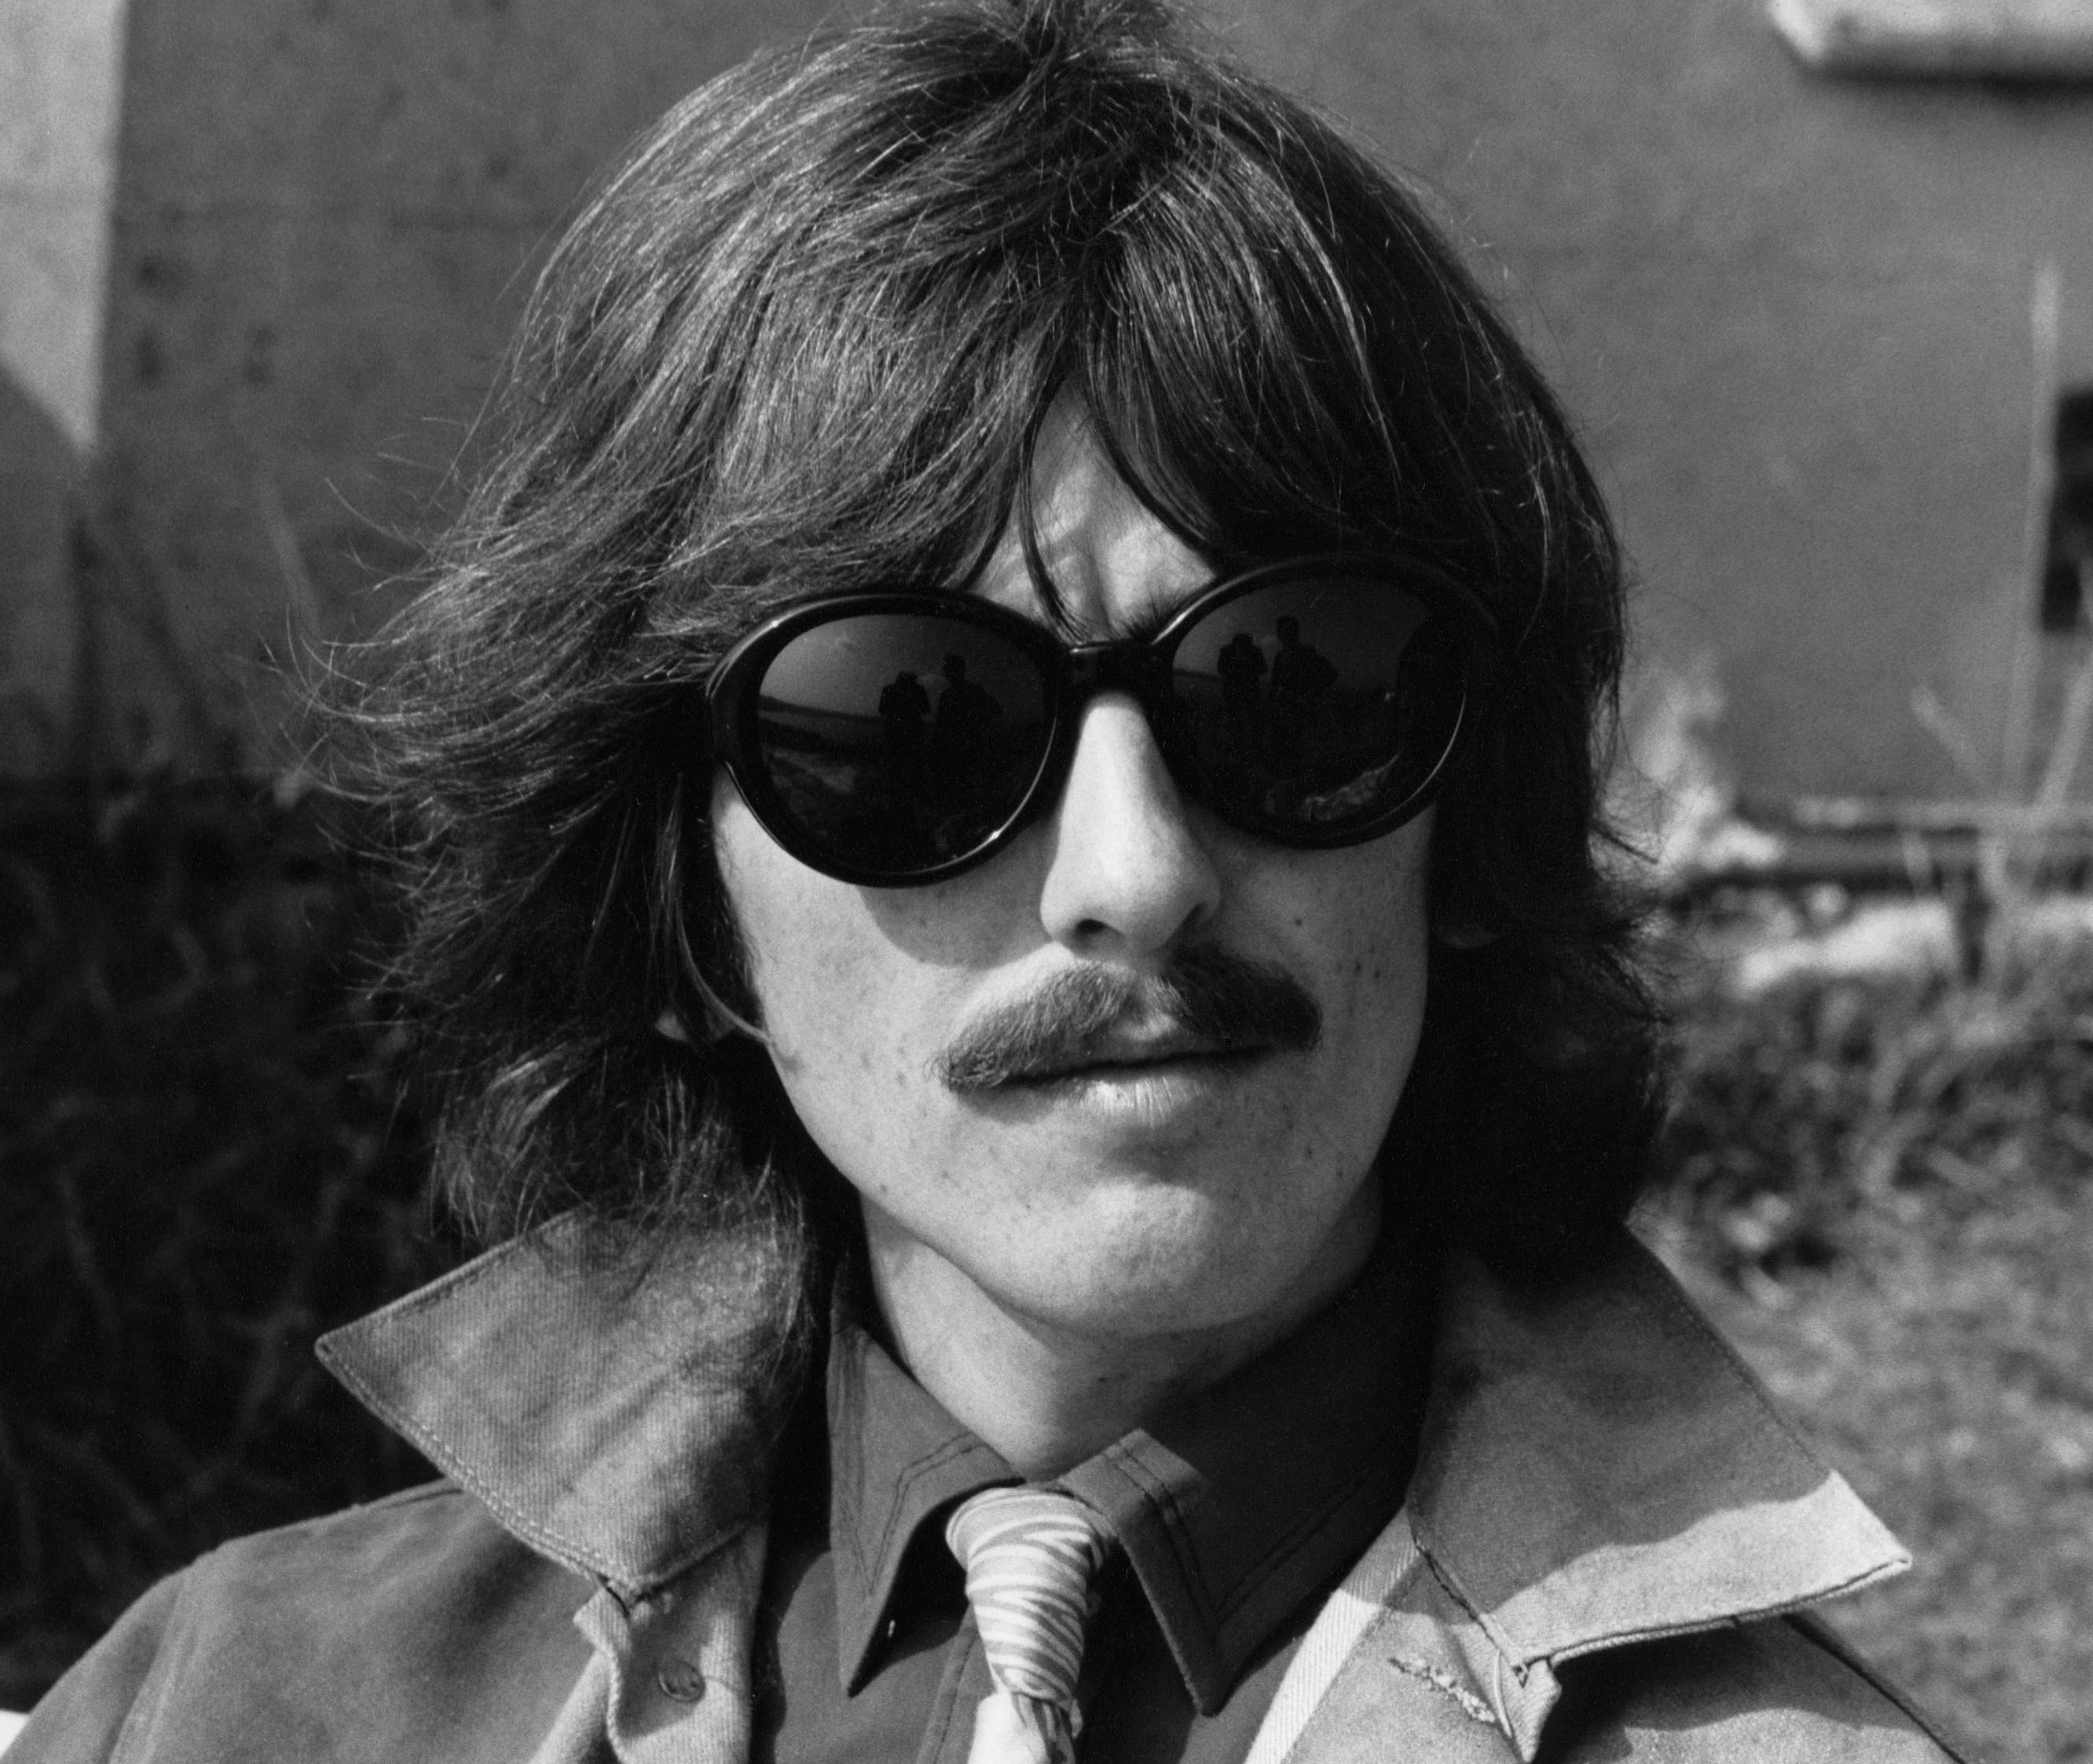 George Harrison of The Beatles, wearing sunglasses and a denim jacket, takes part in filming of the television musical film 'Magical Mystery Tour' in Plymouth, Devon on September 12, 1967.